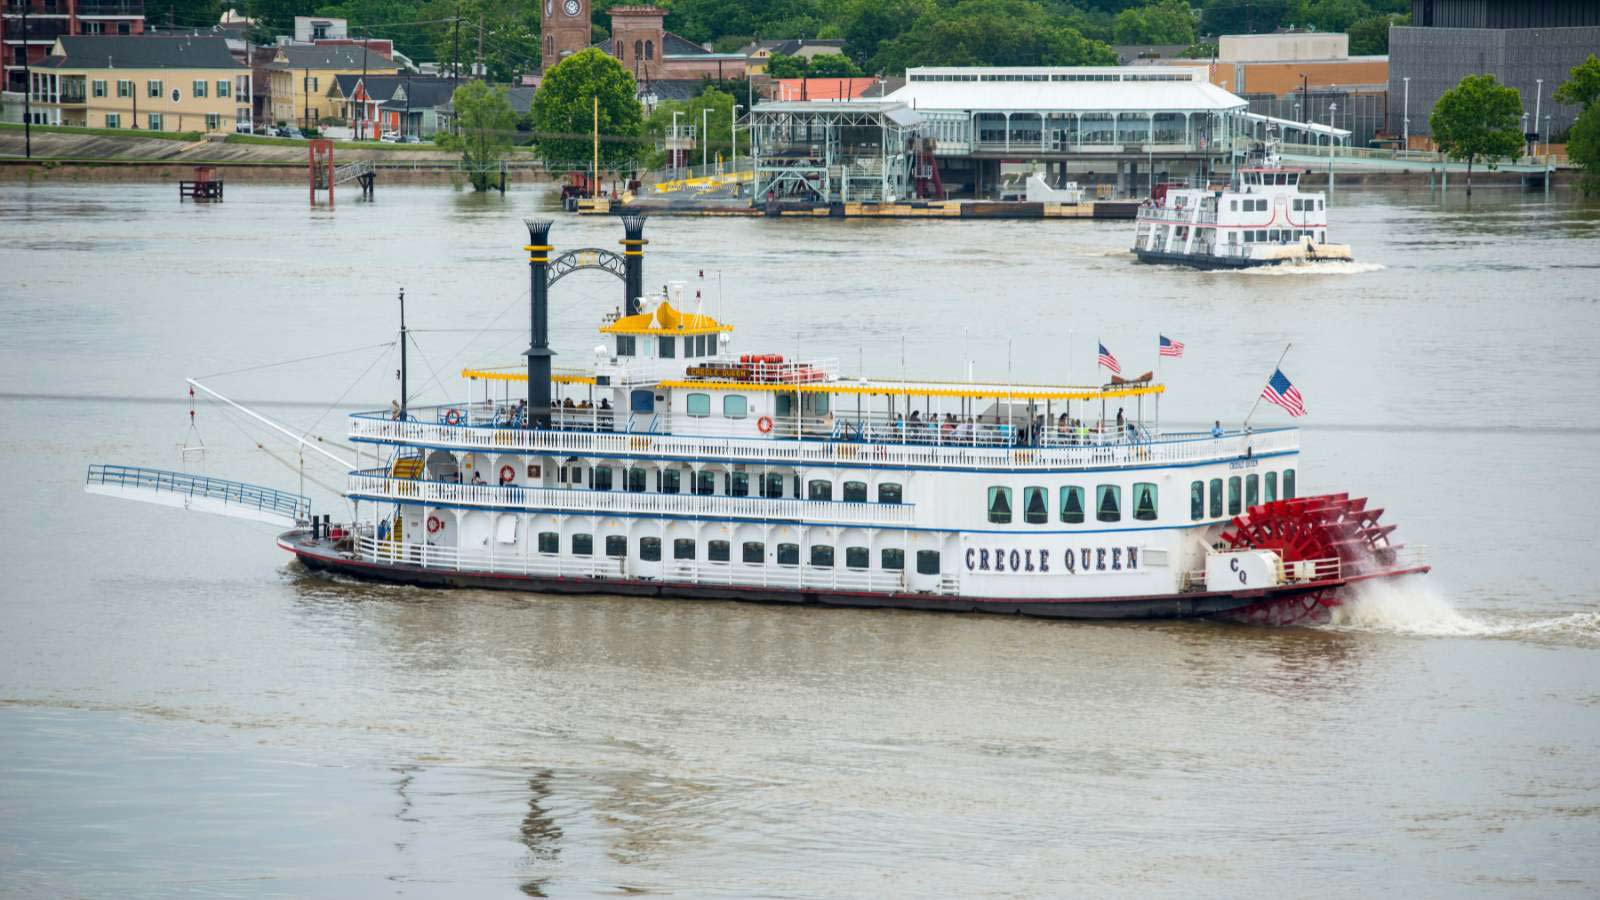 <p>The Mississippi River is long enough for you to take a cruise on. It’s actually the third-longest river in the world at 2,350 miles. The cruise industry has broken this off into three sections, each section takes about a week to cruise or you can knock them all out in one big three-week trip, and it’s worth it.</p>